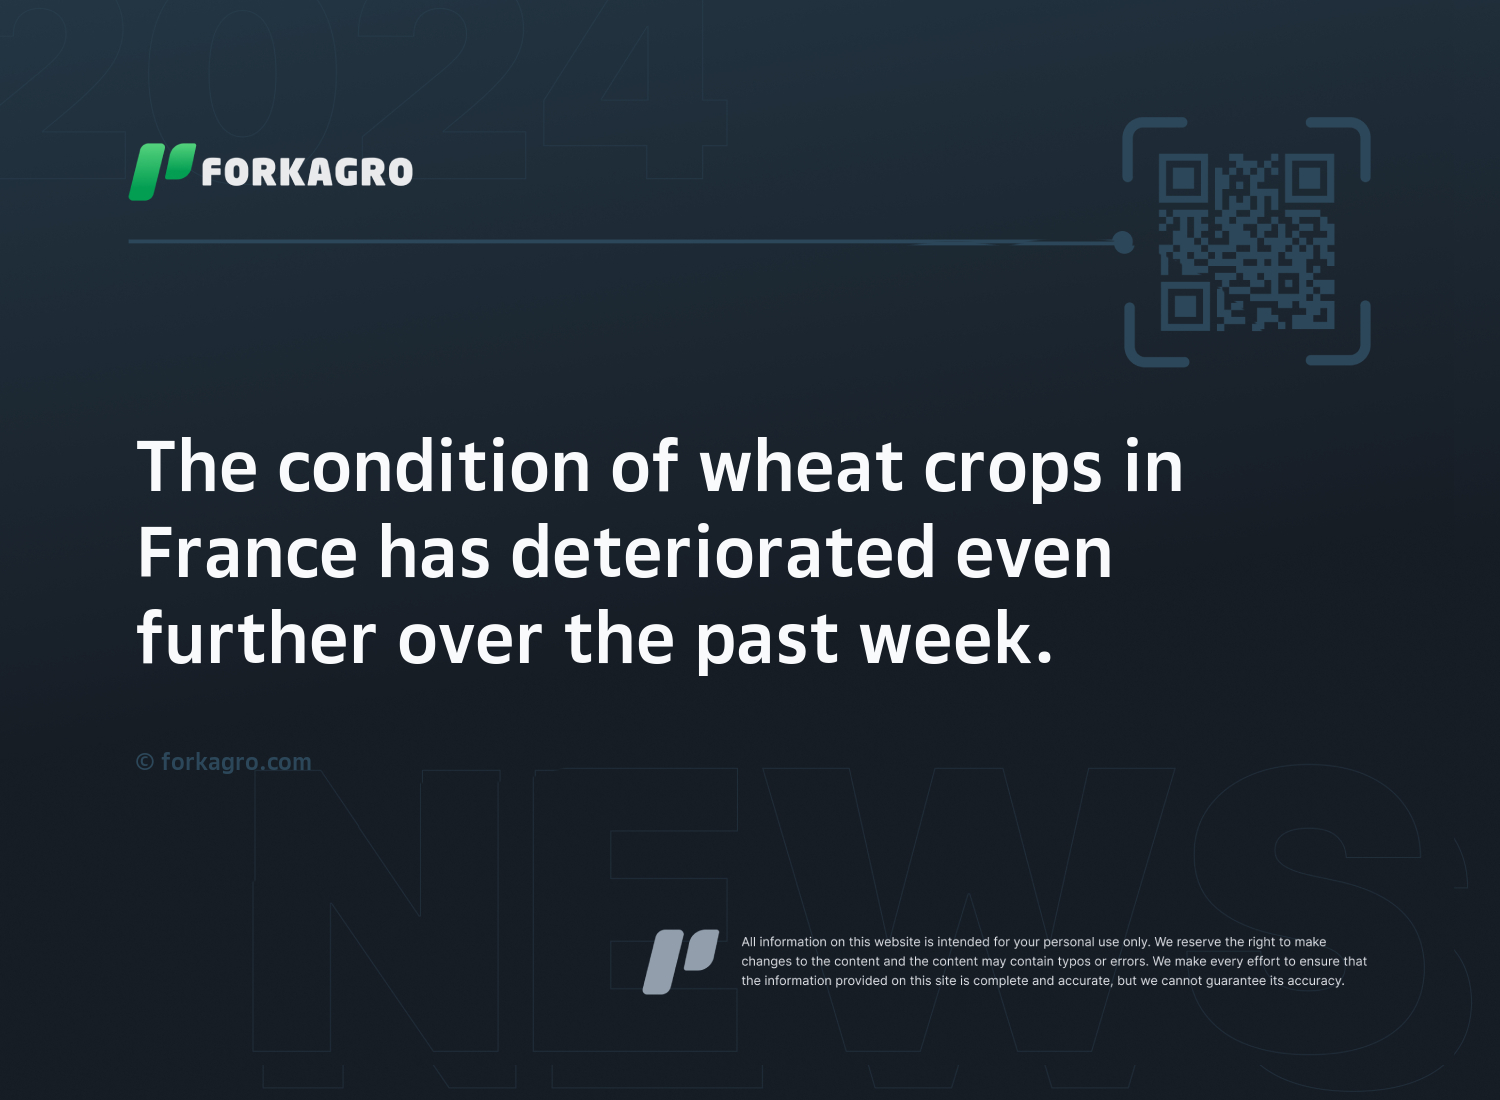 The condition of wheat crops in France has deteriorated even further over the past week.